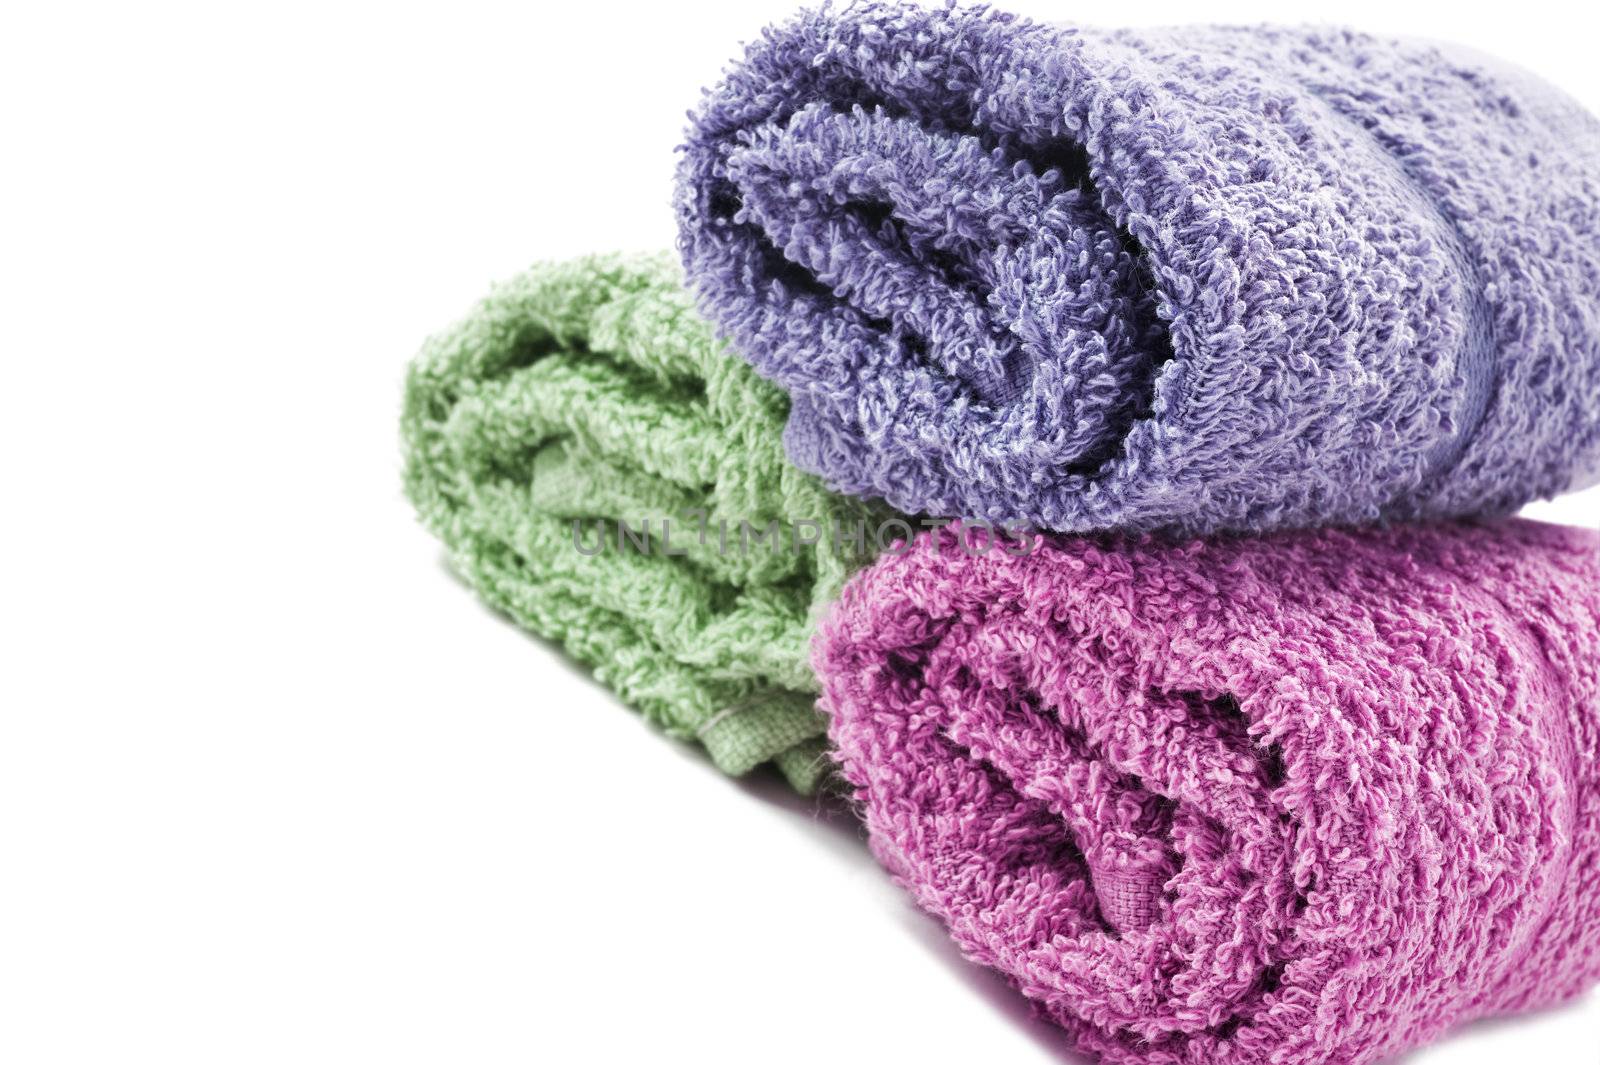 Fresh rolled up towels on a white background by tish1